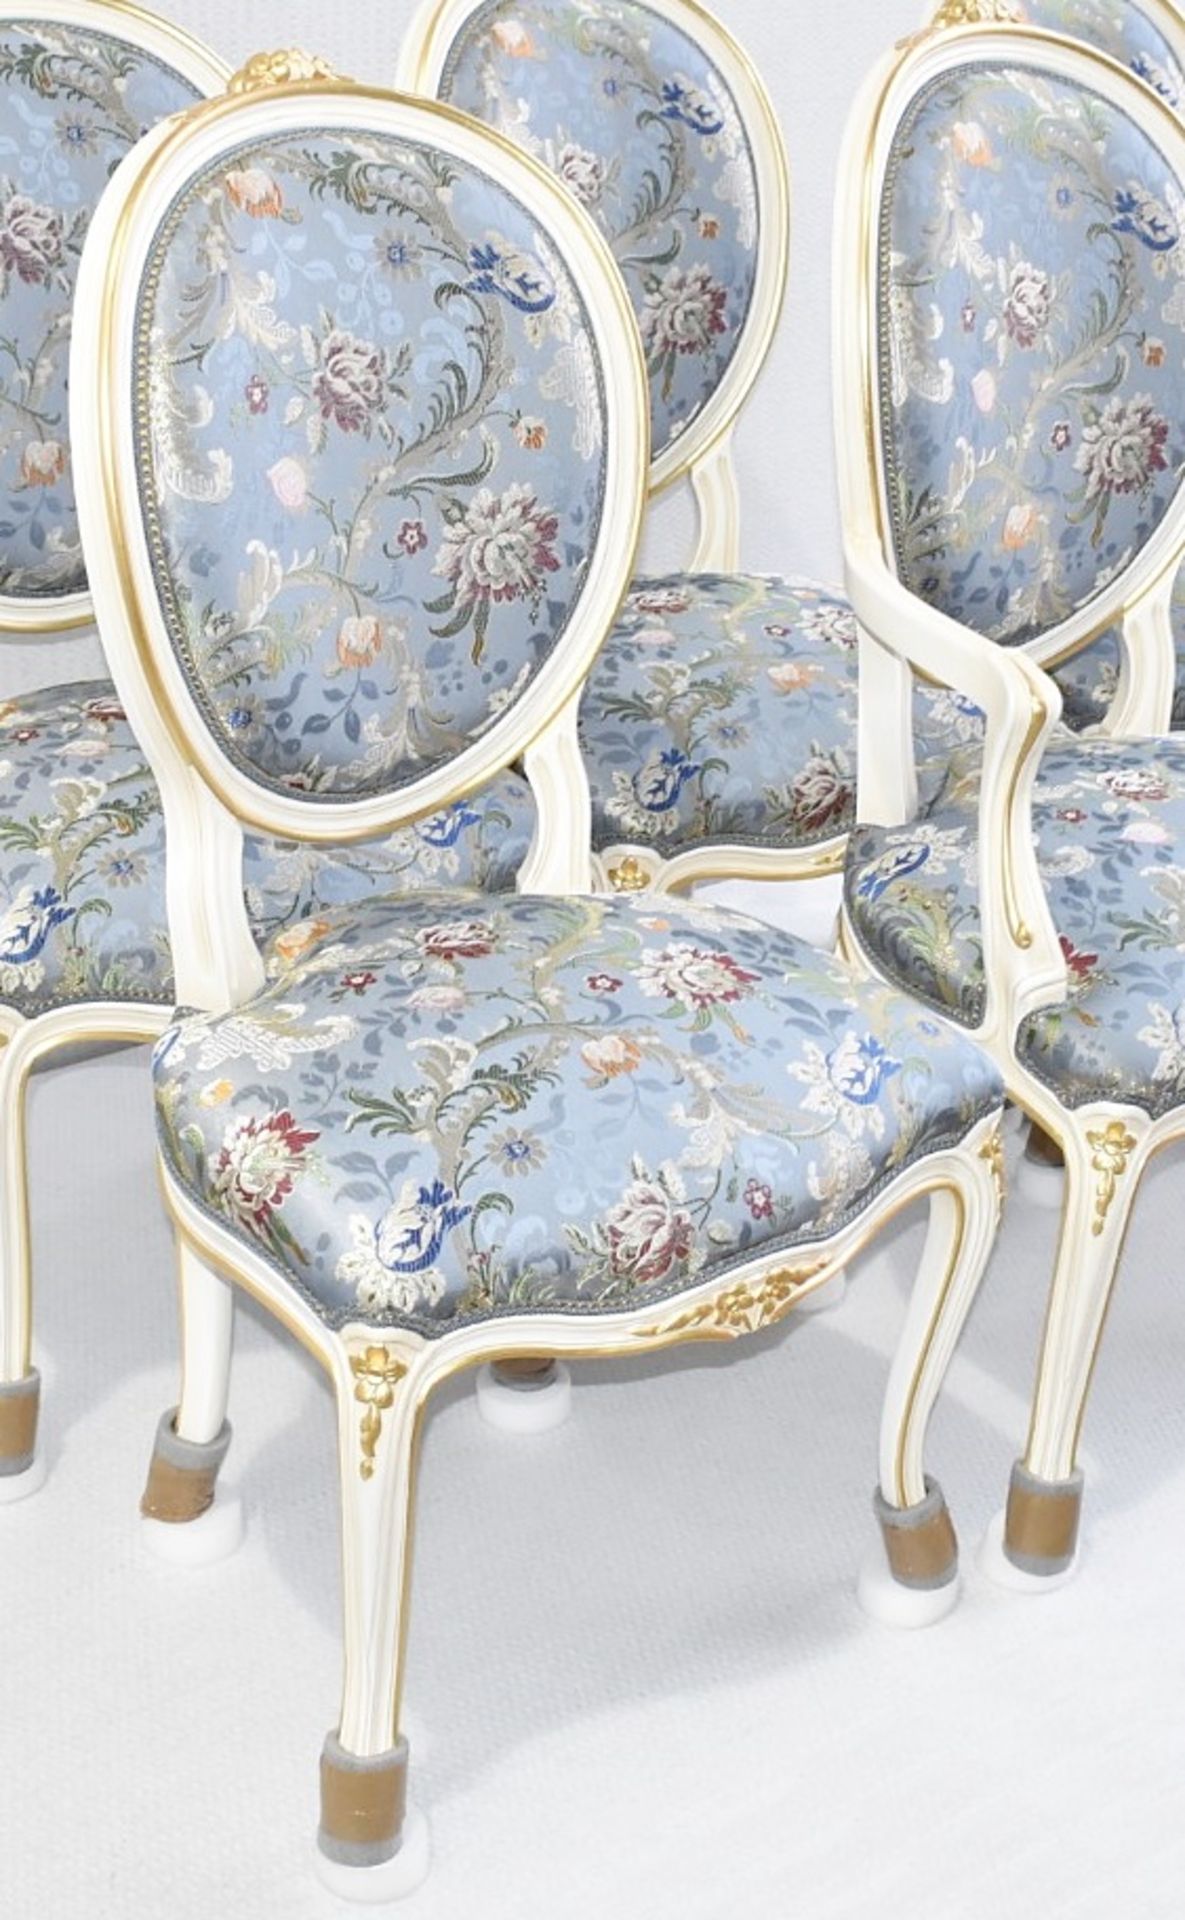 Set of 6 x ANGELO CAPPELLINI 'Timeless' Baroque-style Carved Dining Chairs, Floral Upholstered - Image 2 of 14